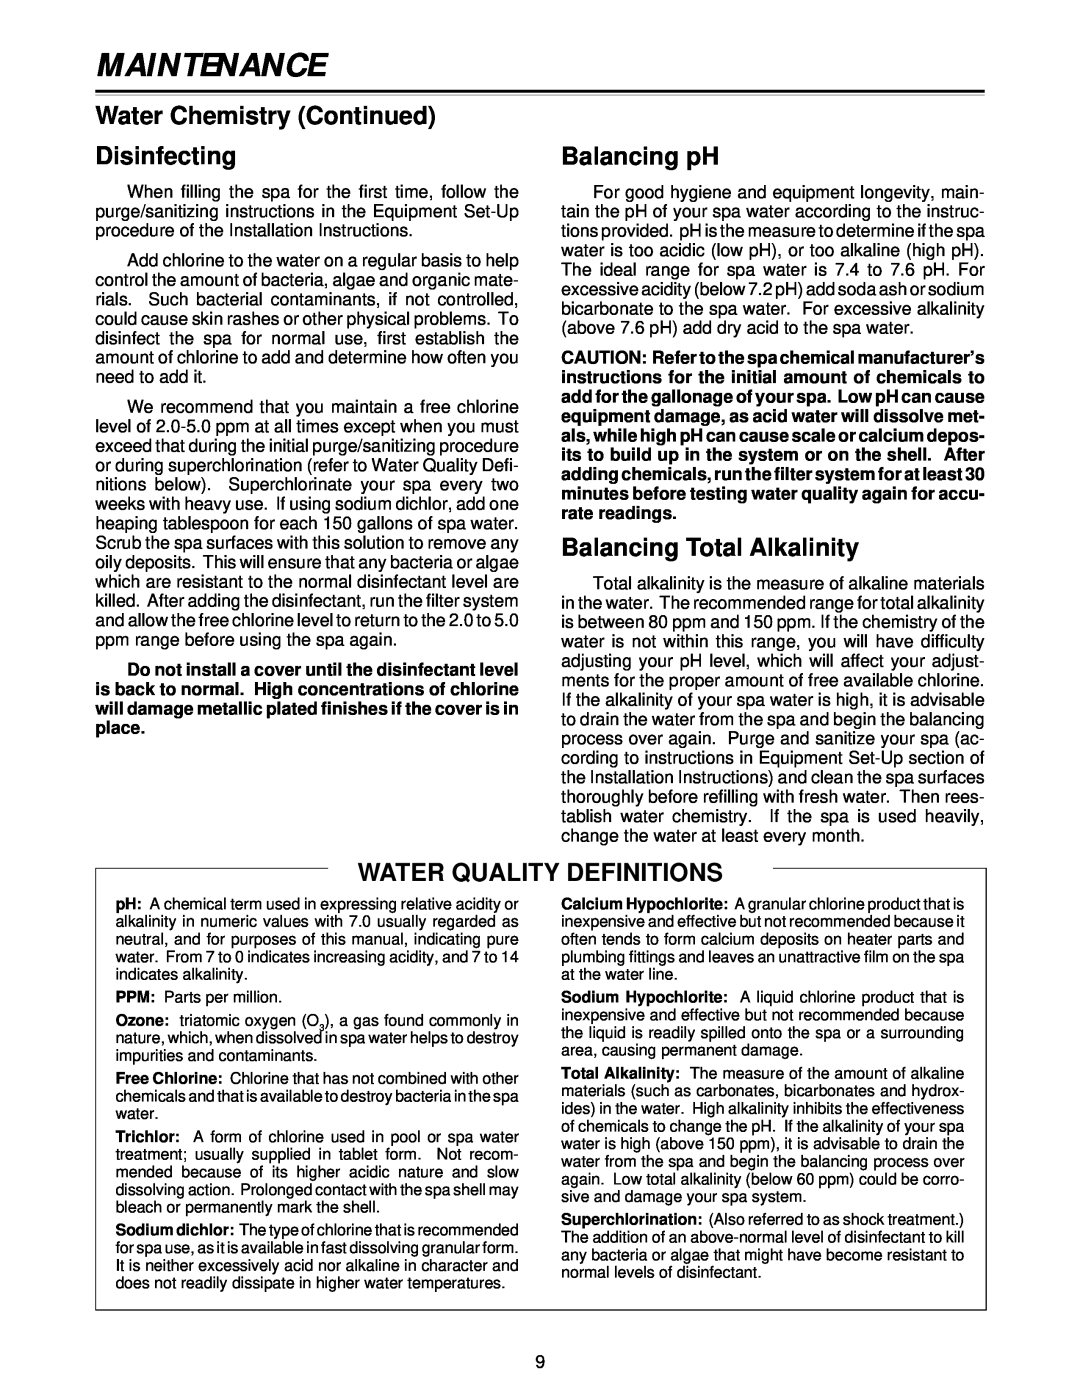 Jacuzzi Z101 Water Chemistry Continued Disinfecting, Balancing pH, Balancing Total Alkalinity, Water Quality Definitions 